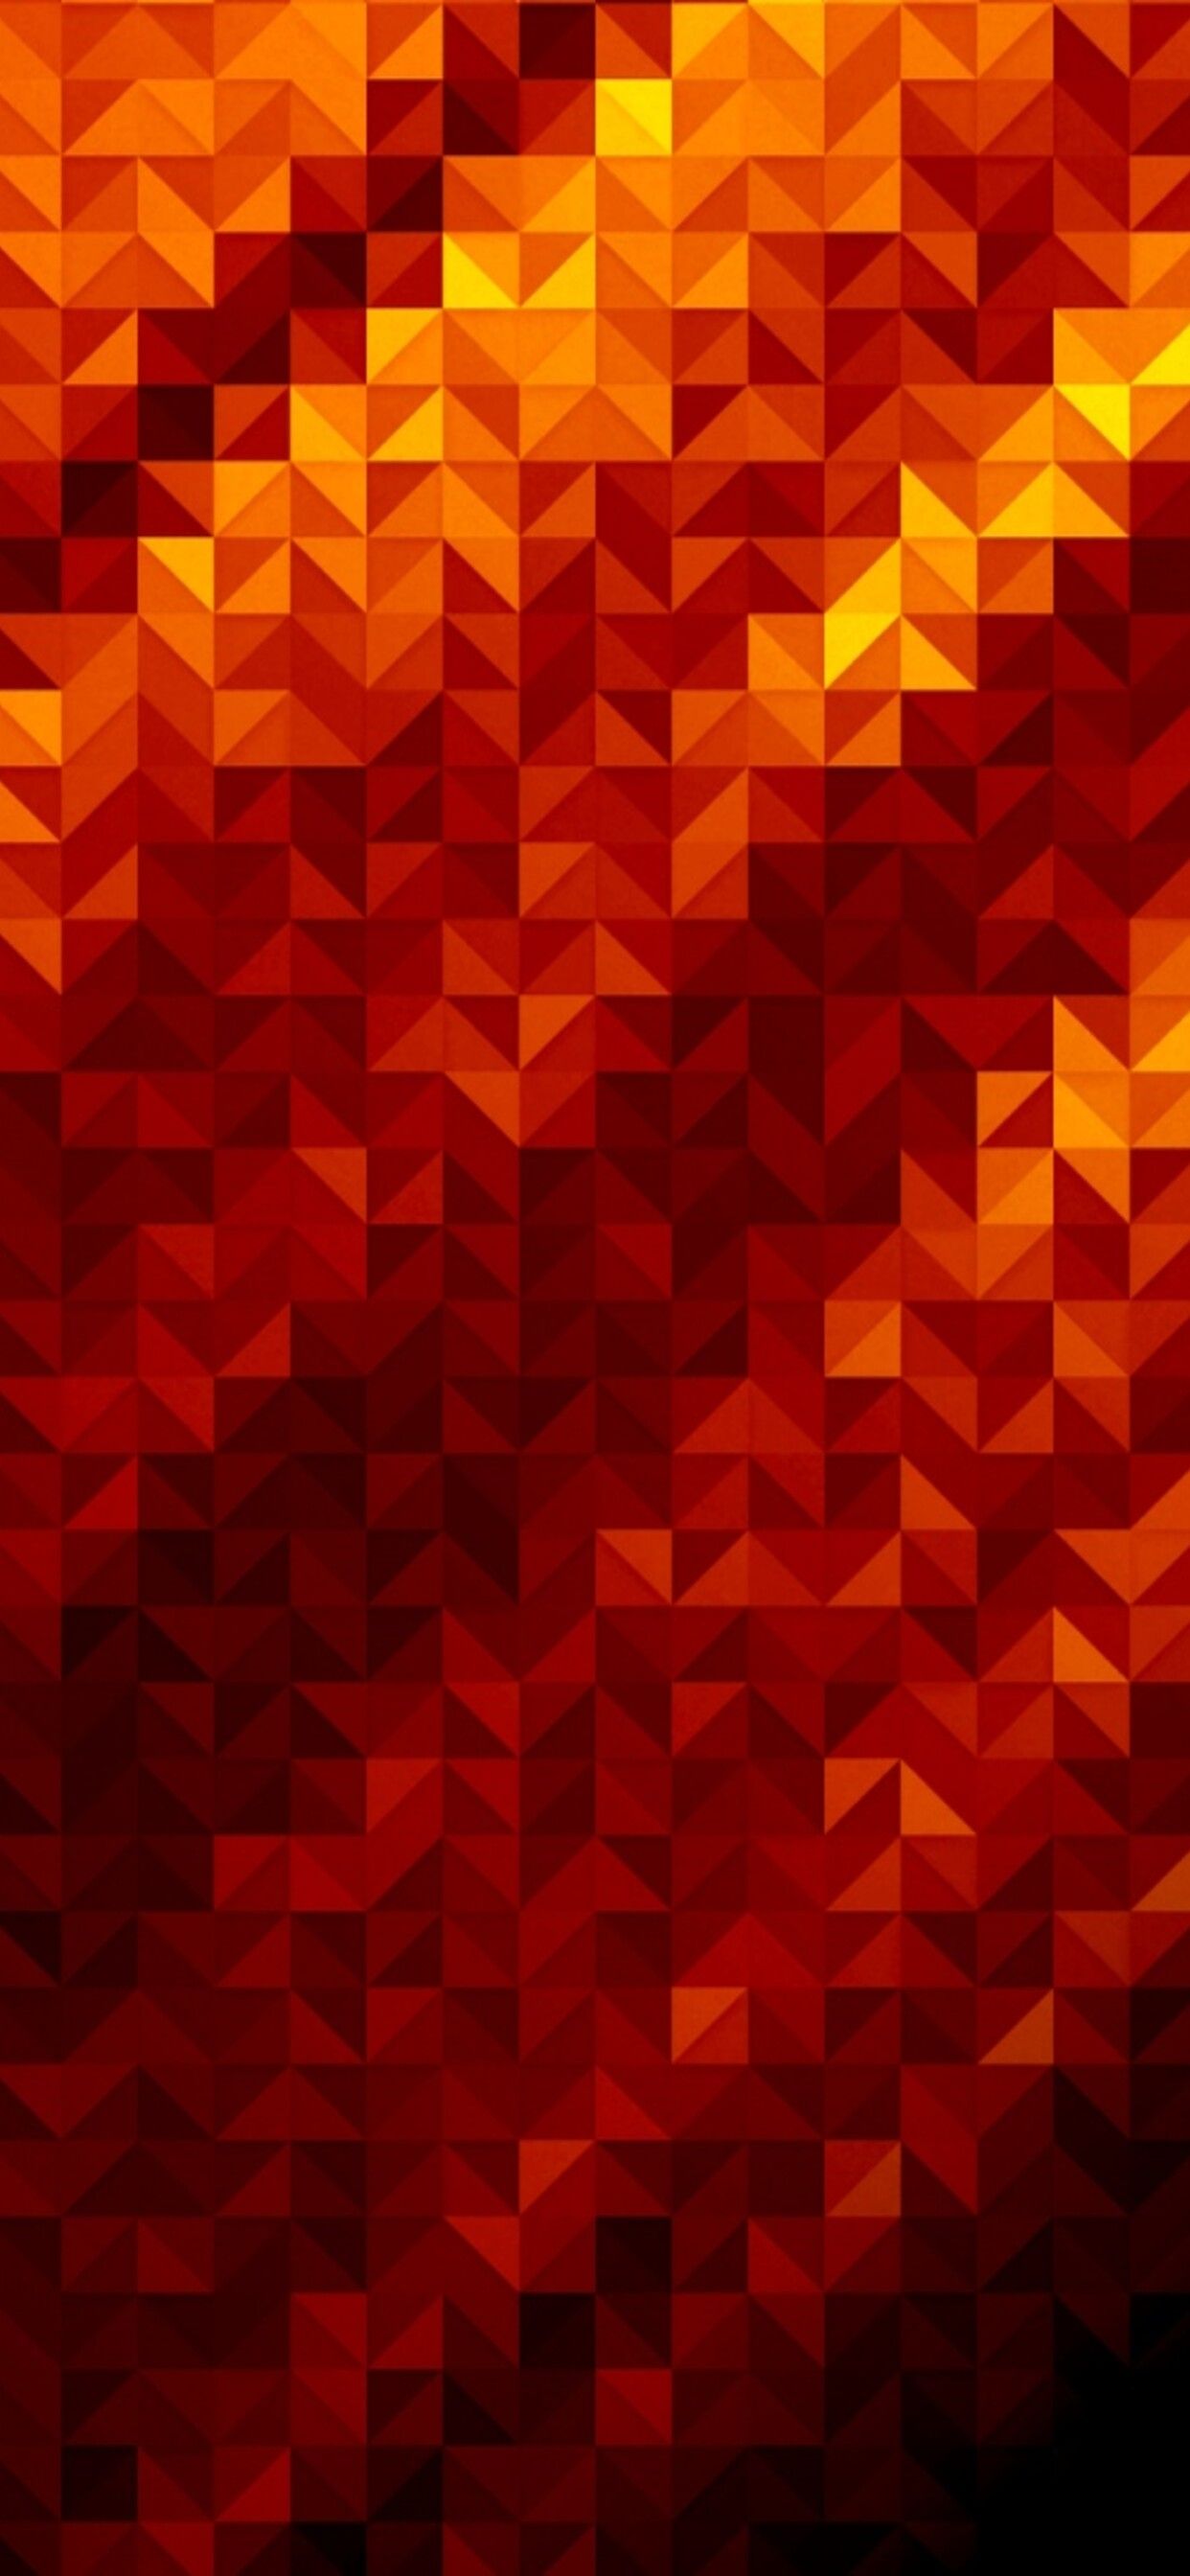 Abstract orange and purple wallpaper